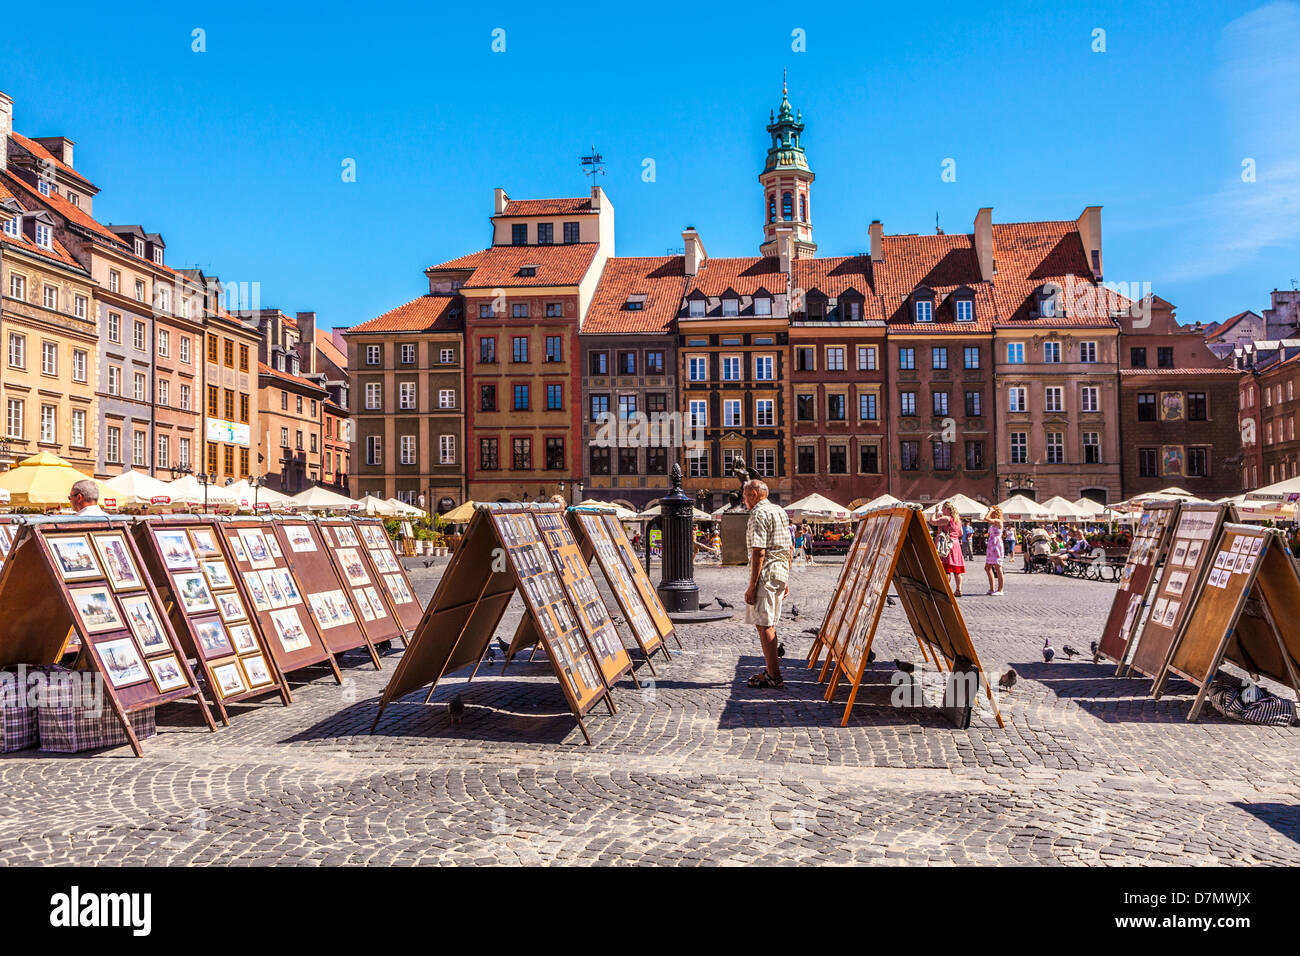 Display of artists' paintings for sale to tourists in Stary Rynek, Stare Miasto,Old Town Market Place in Warsaw, Poland. Stock Photo